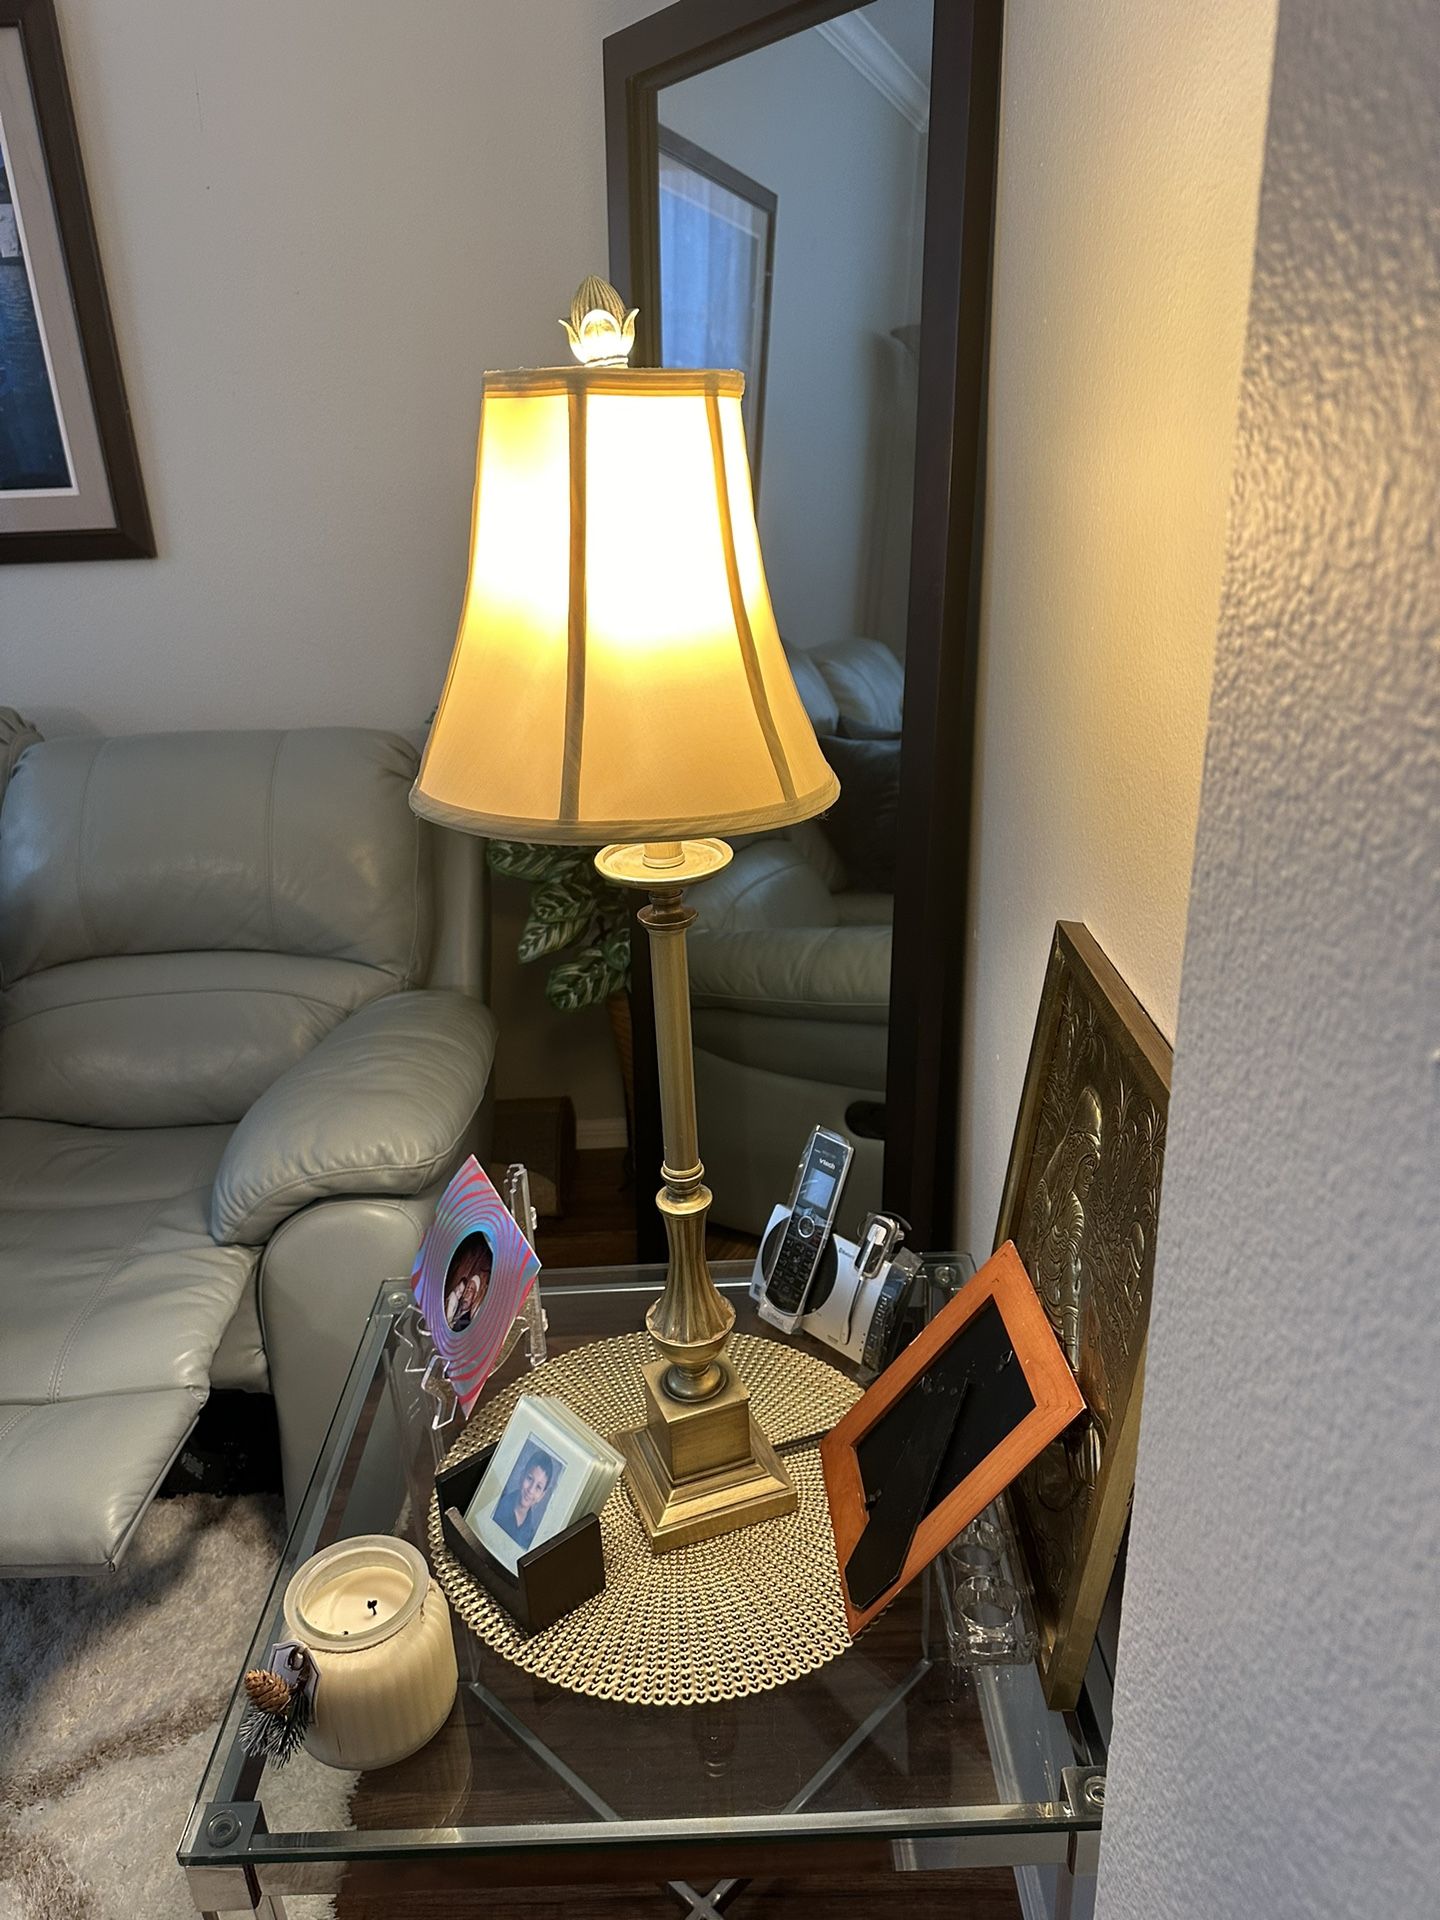 Set Of 2 Lamps Vantage Gold for Sale in Land O' Lakes, FL - OfferUp